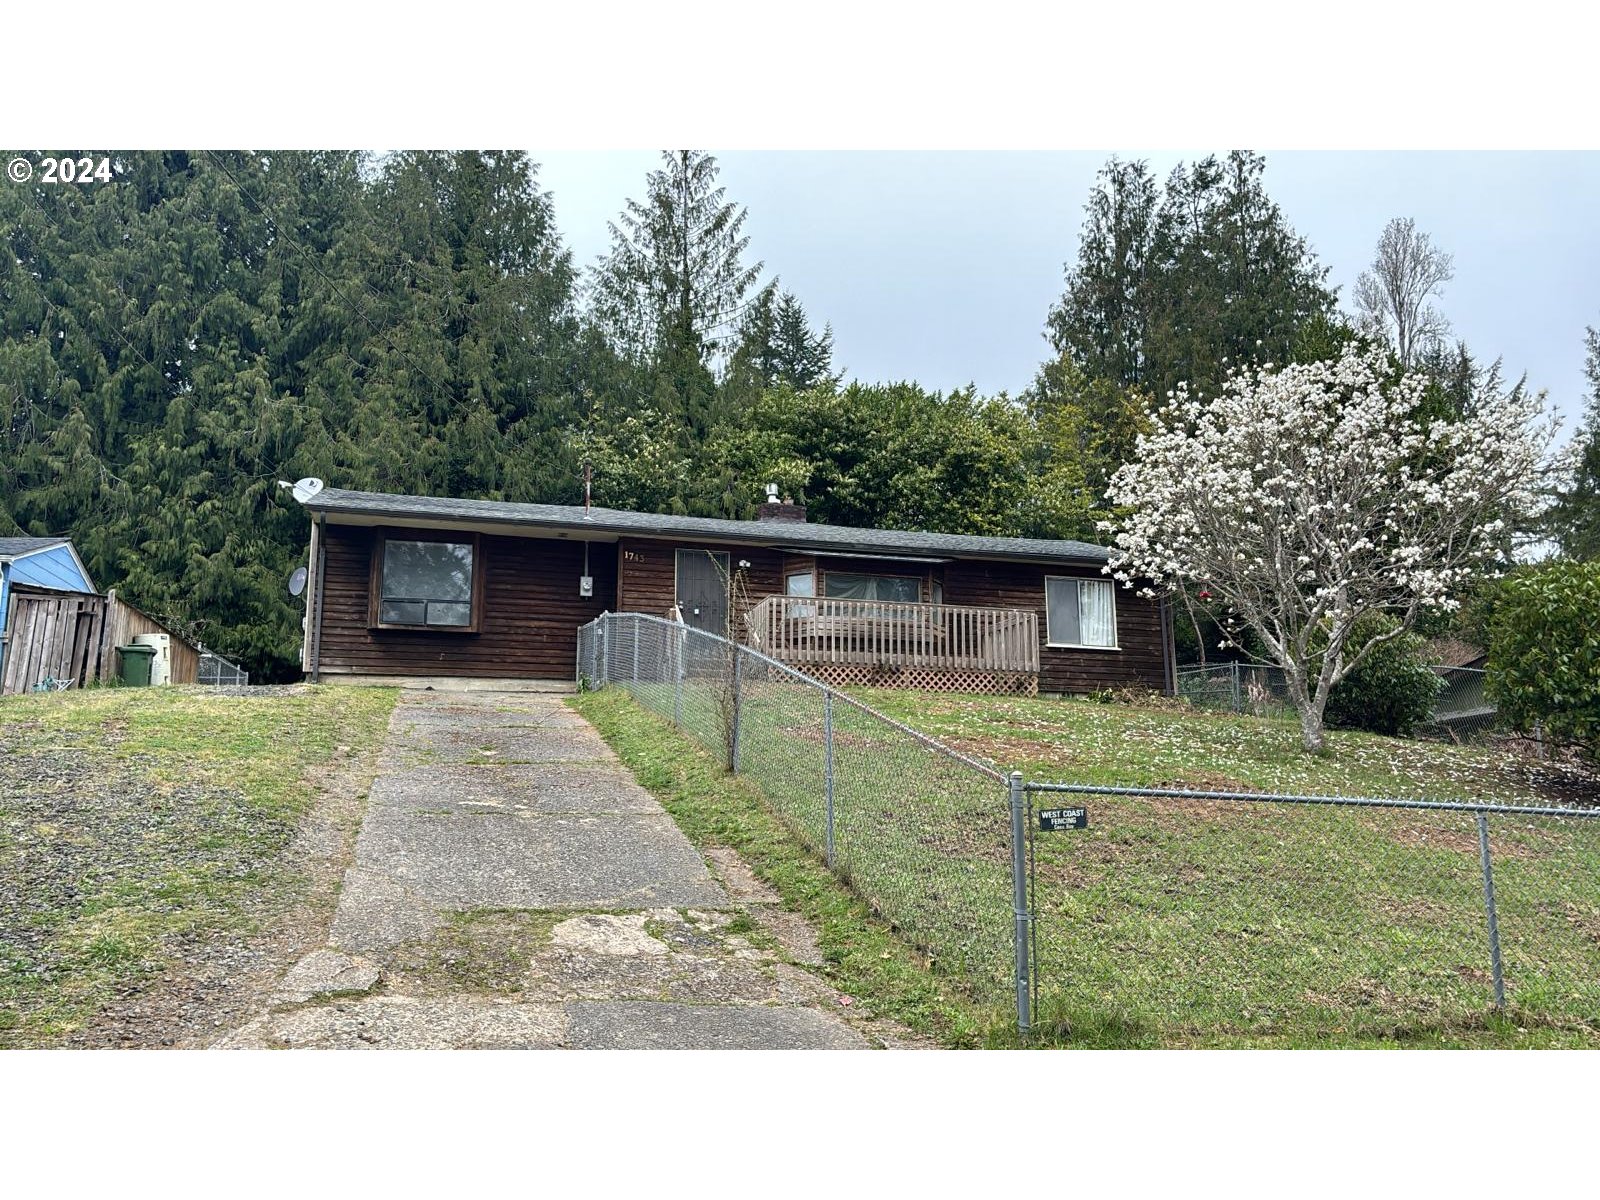 1743 S 20TH ST, Coos Bay, OR 